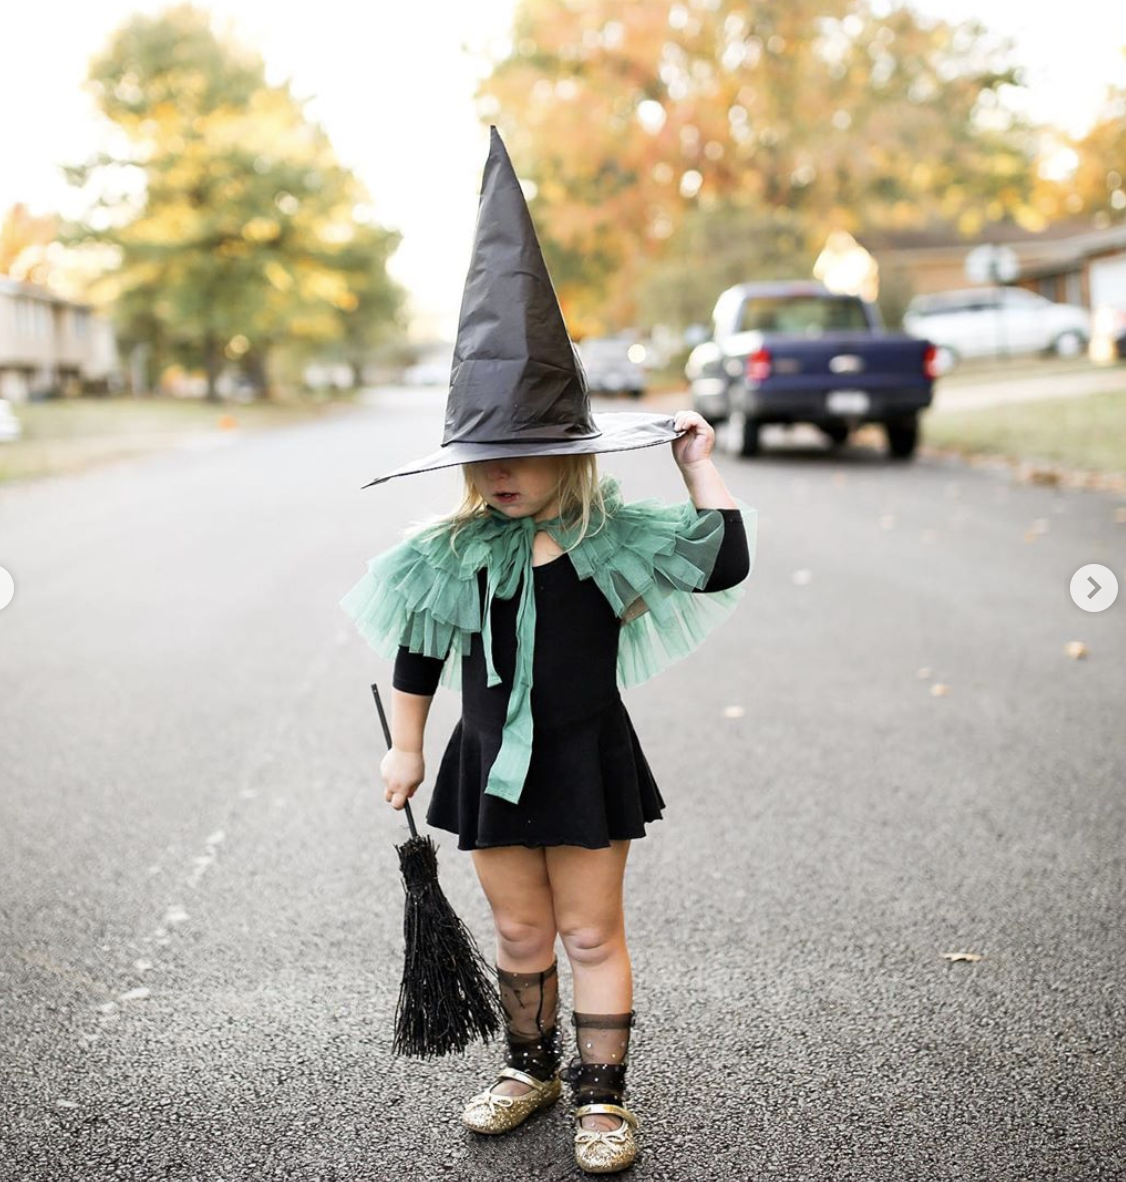 Women's Sexy Witch Halloween Costume | Inked Shop - Inked Shop